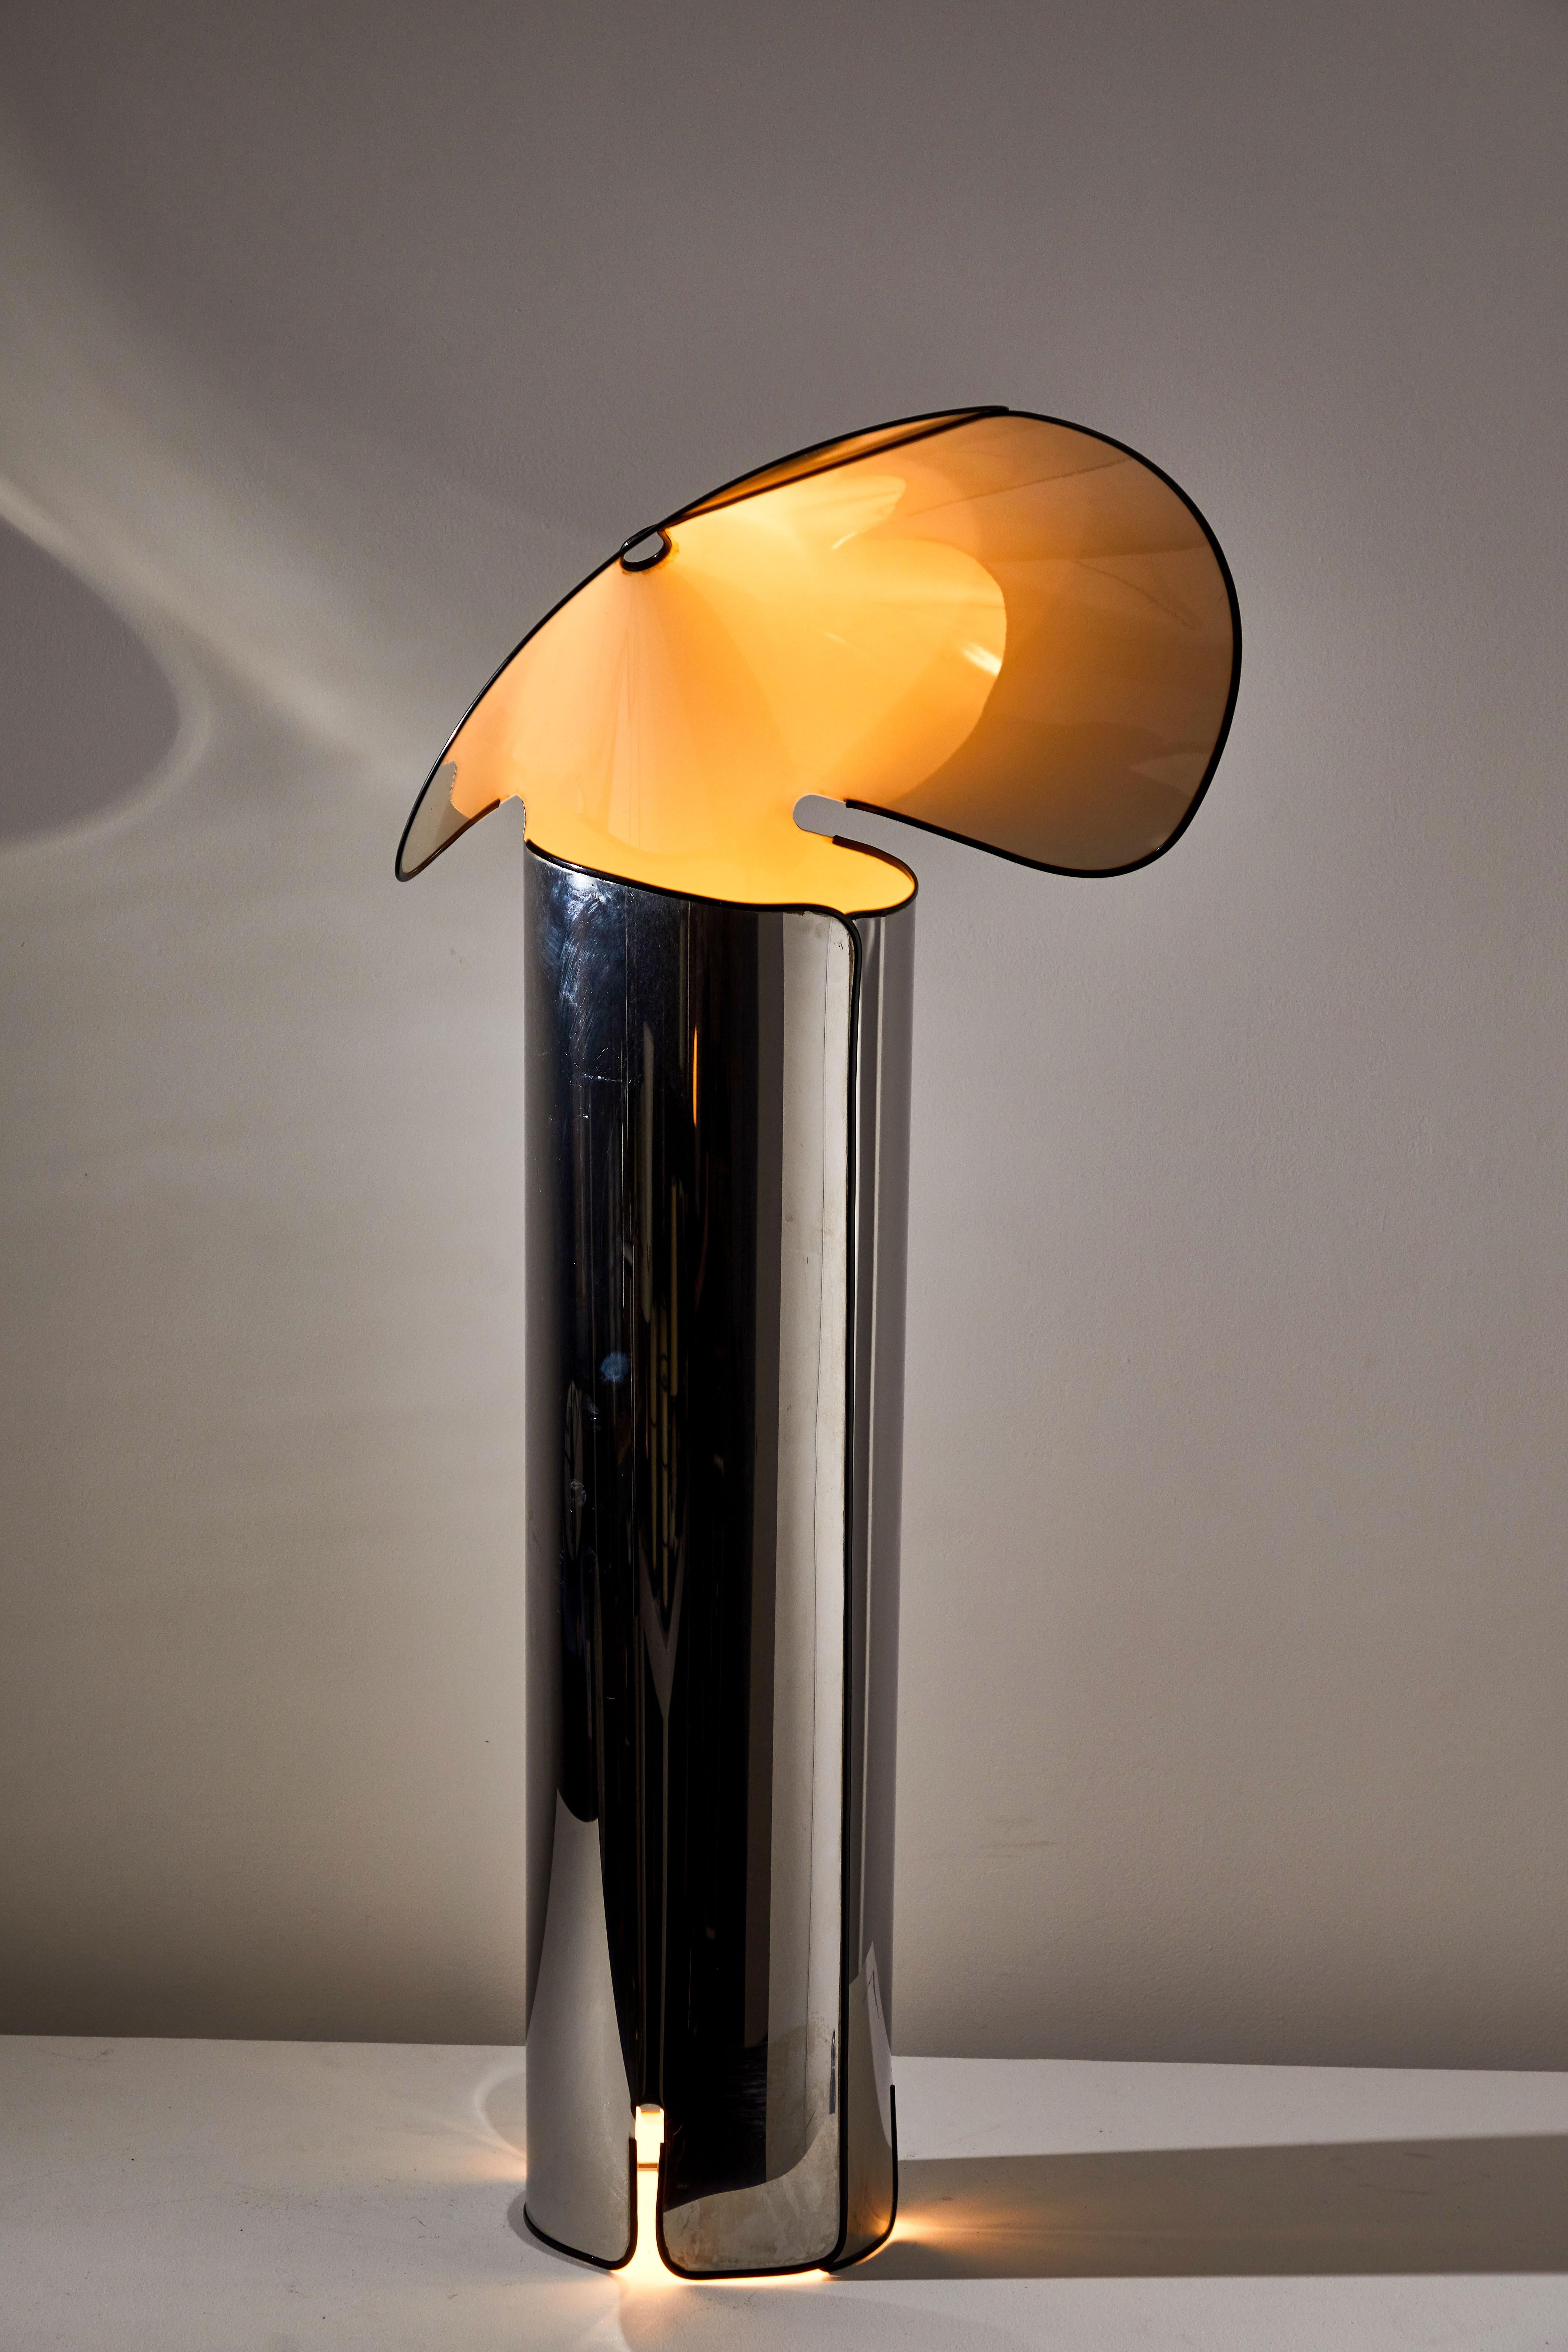 Chiara floor lamp by Mario Bellini for Flos. Designed in 1964 and manufactured in Italy, 1967. Chrome plated metal, enameled metal. Takes one E27 100w maximum bulb. Original European cord. Bulbs provided as a one time courtesy.